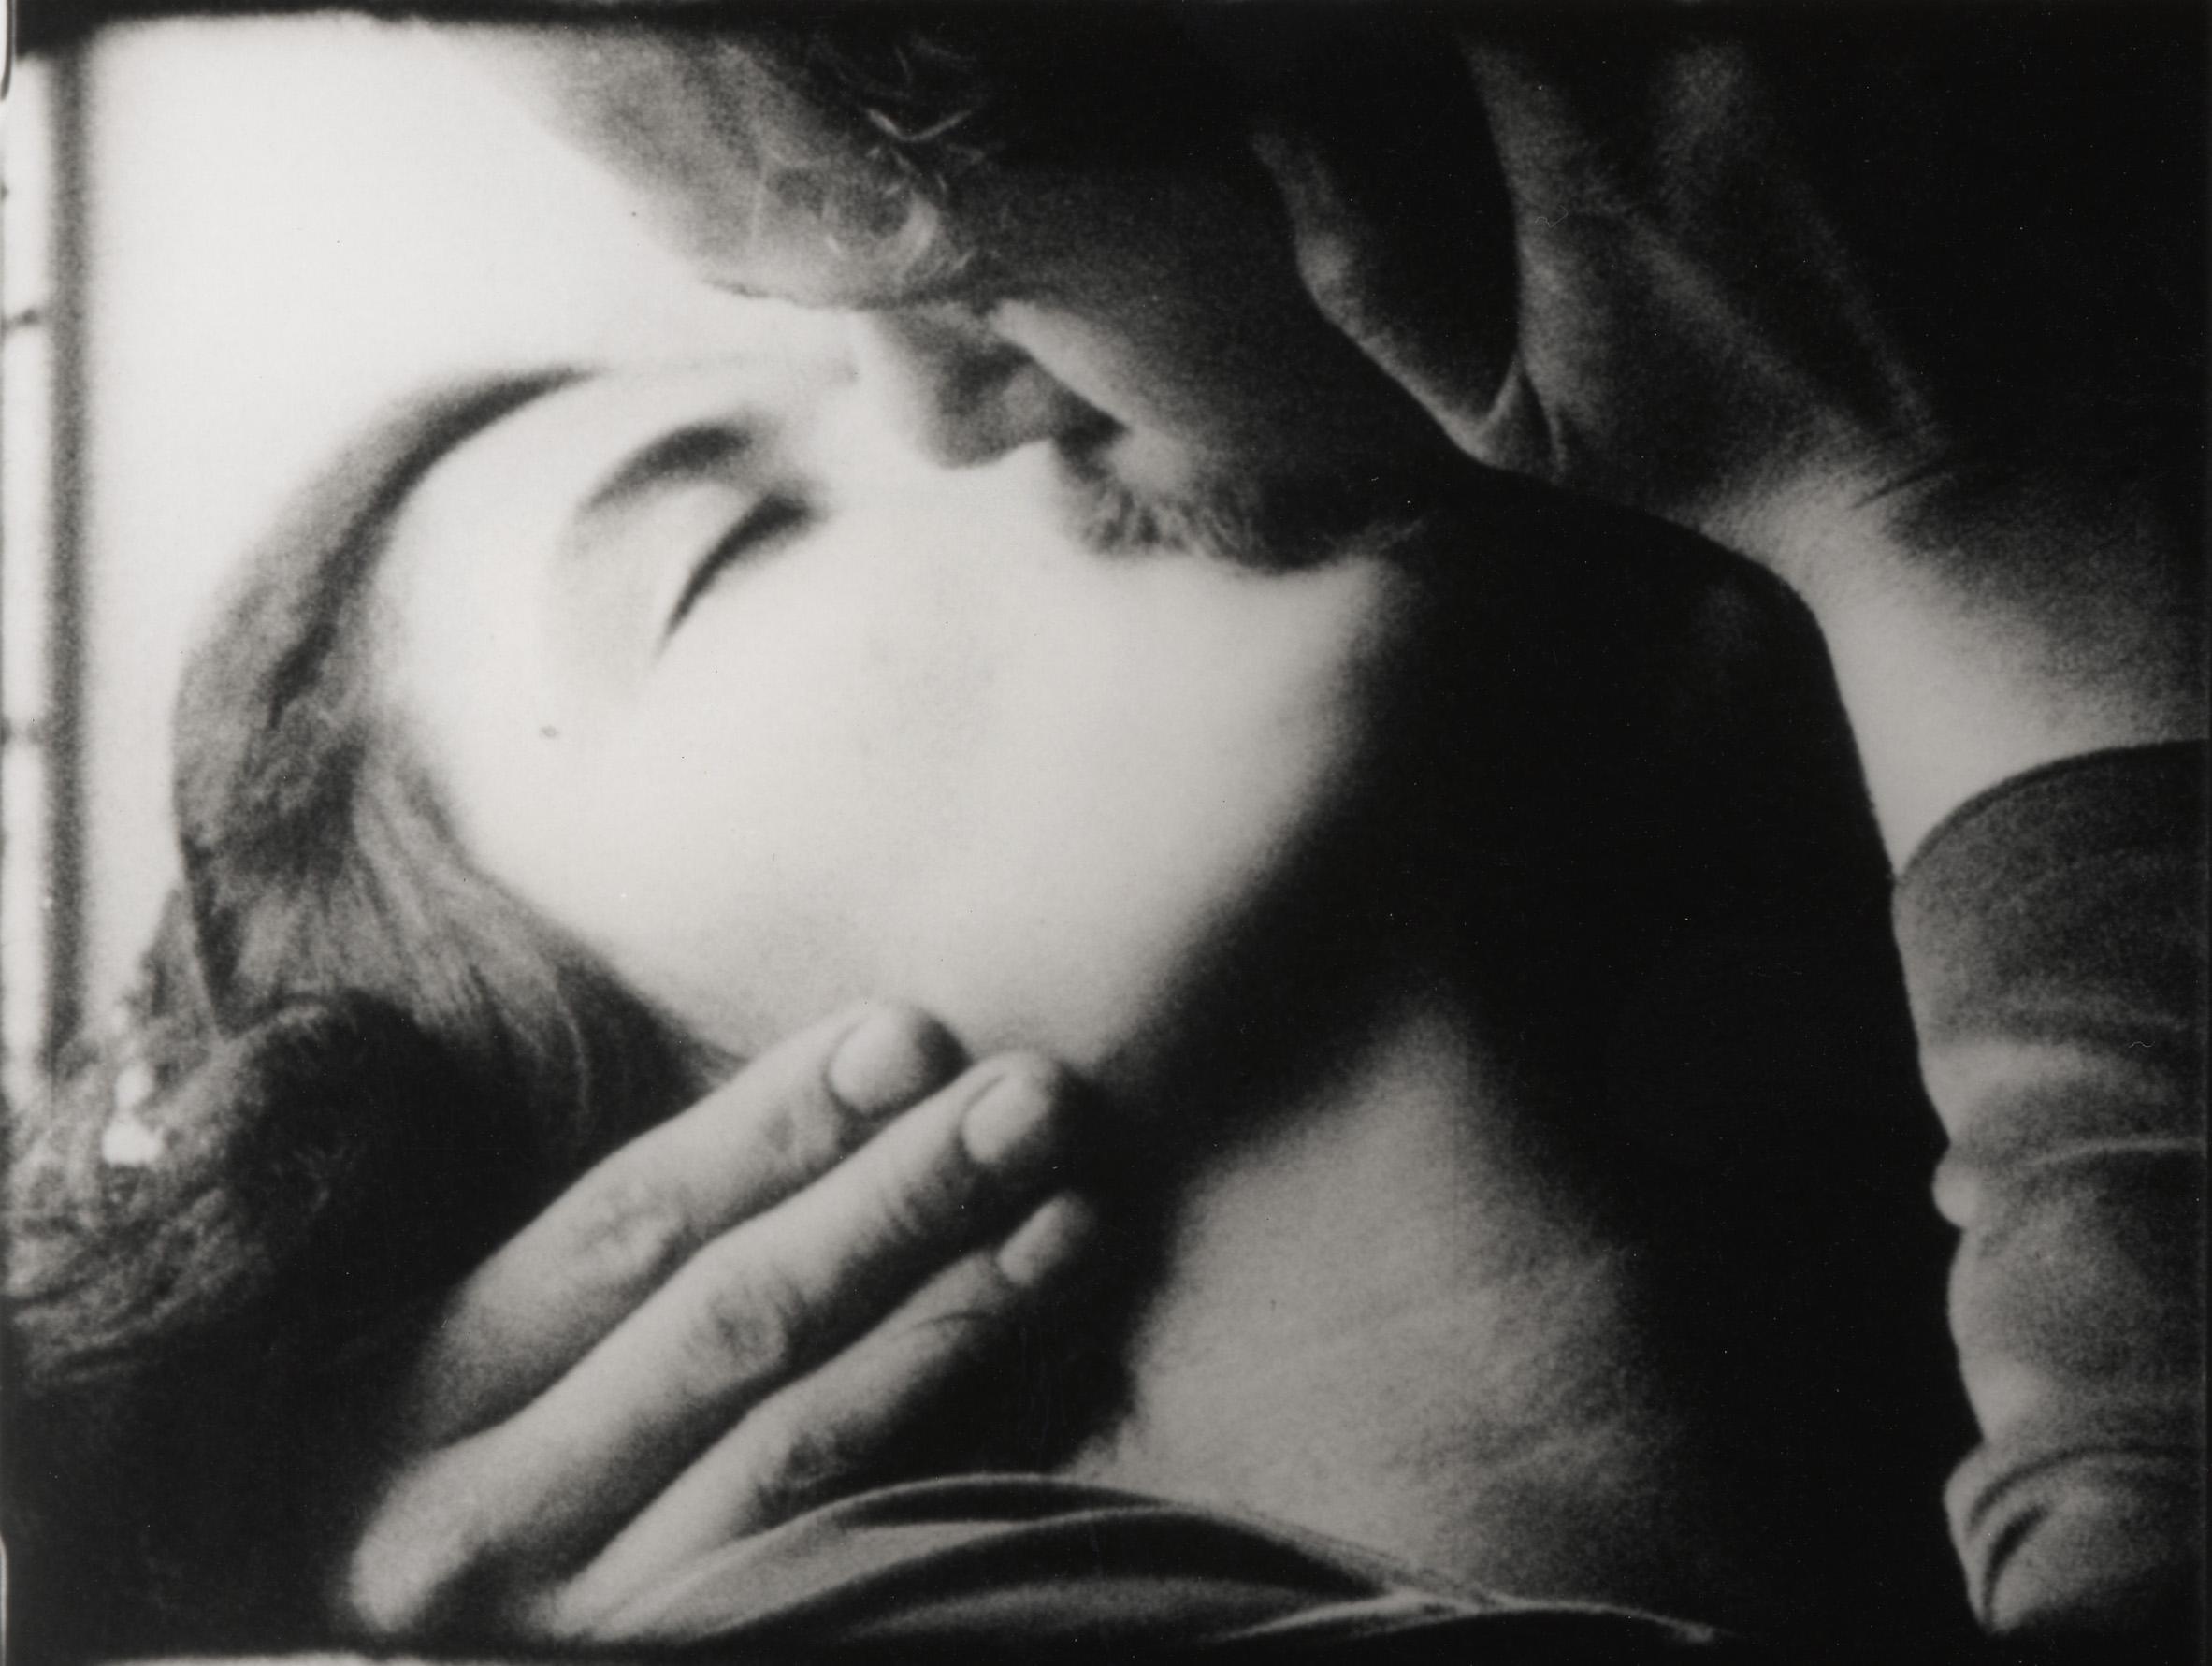 Closely cropped black-and-white photograph of a woman and man kissing, she tilts her head back supported by his hand